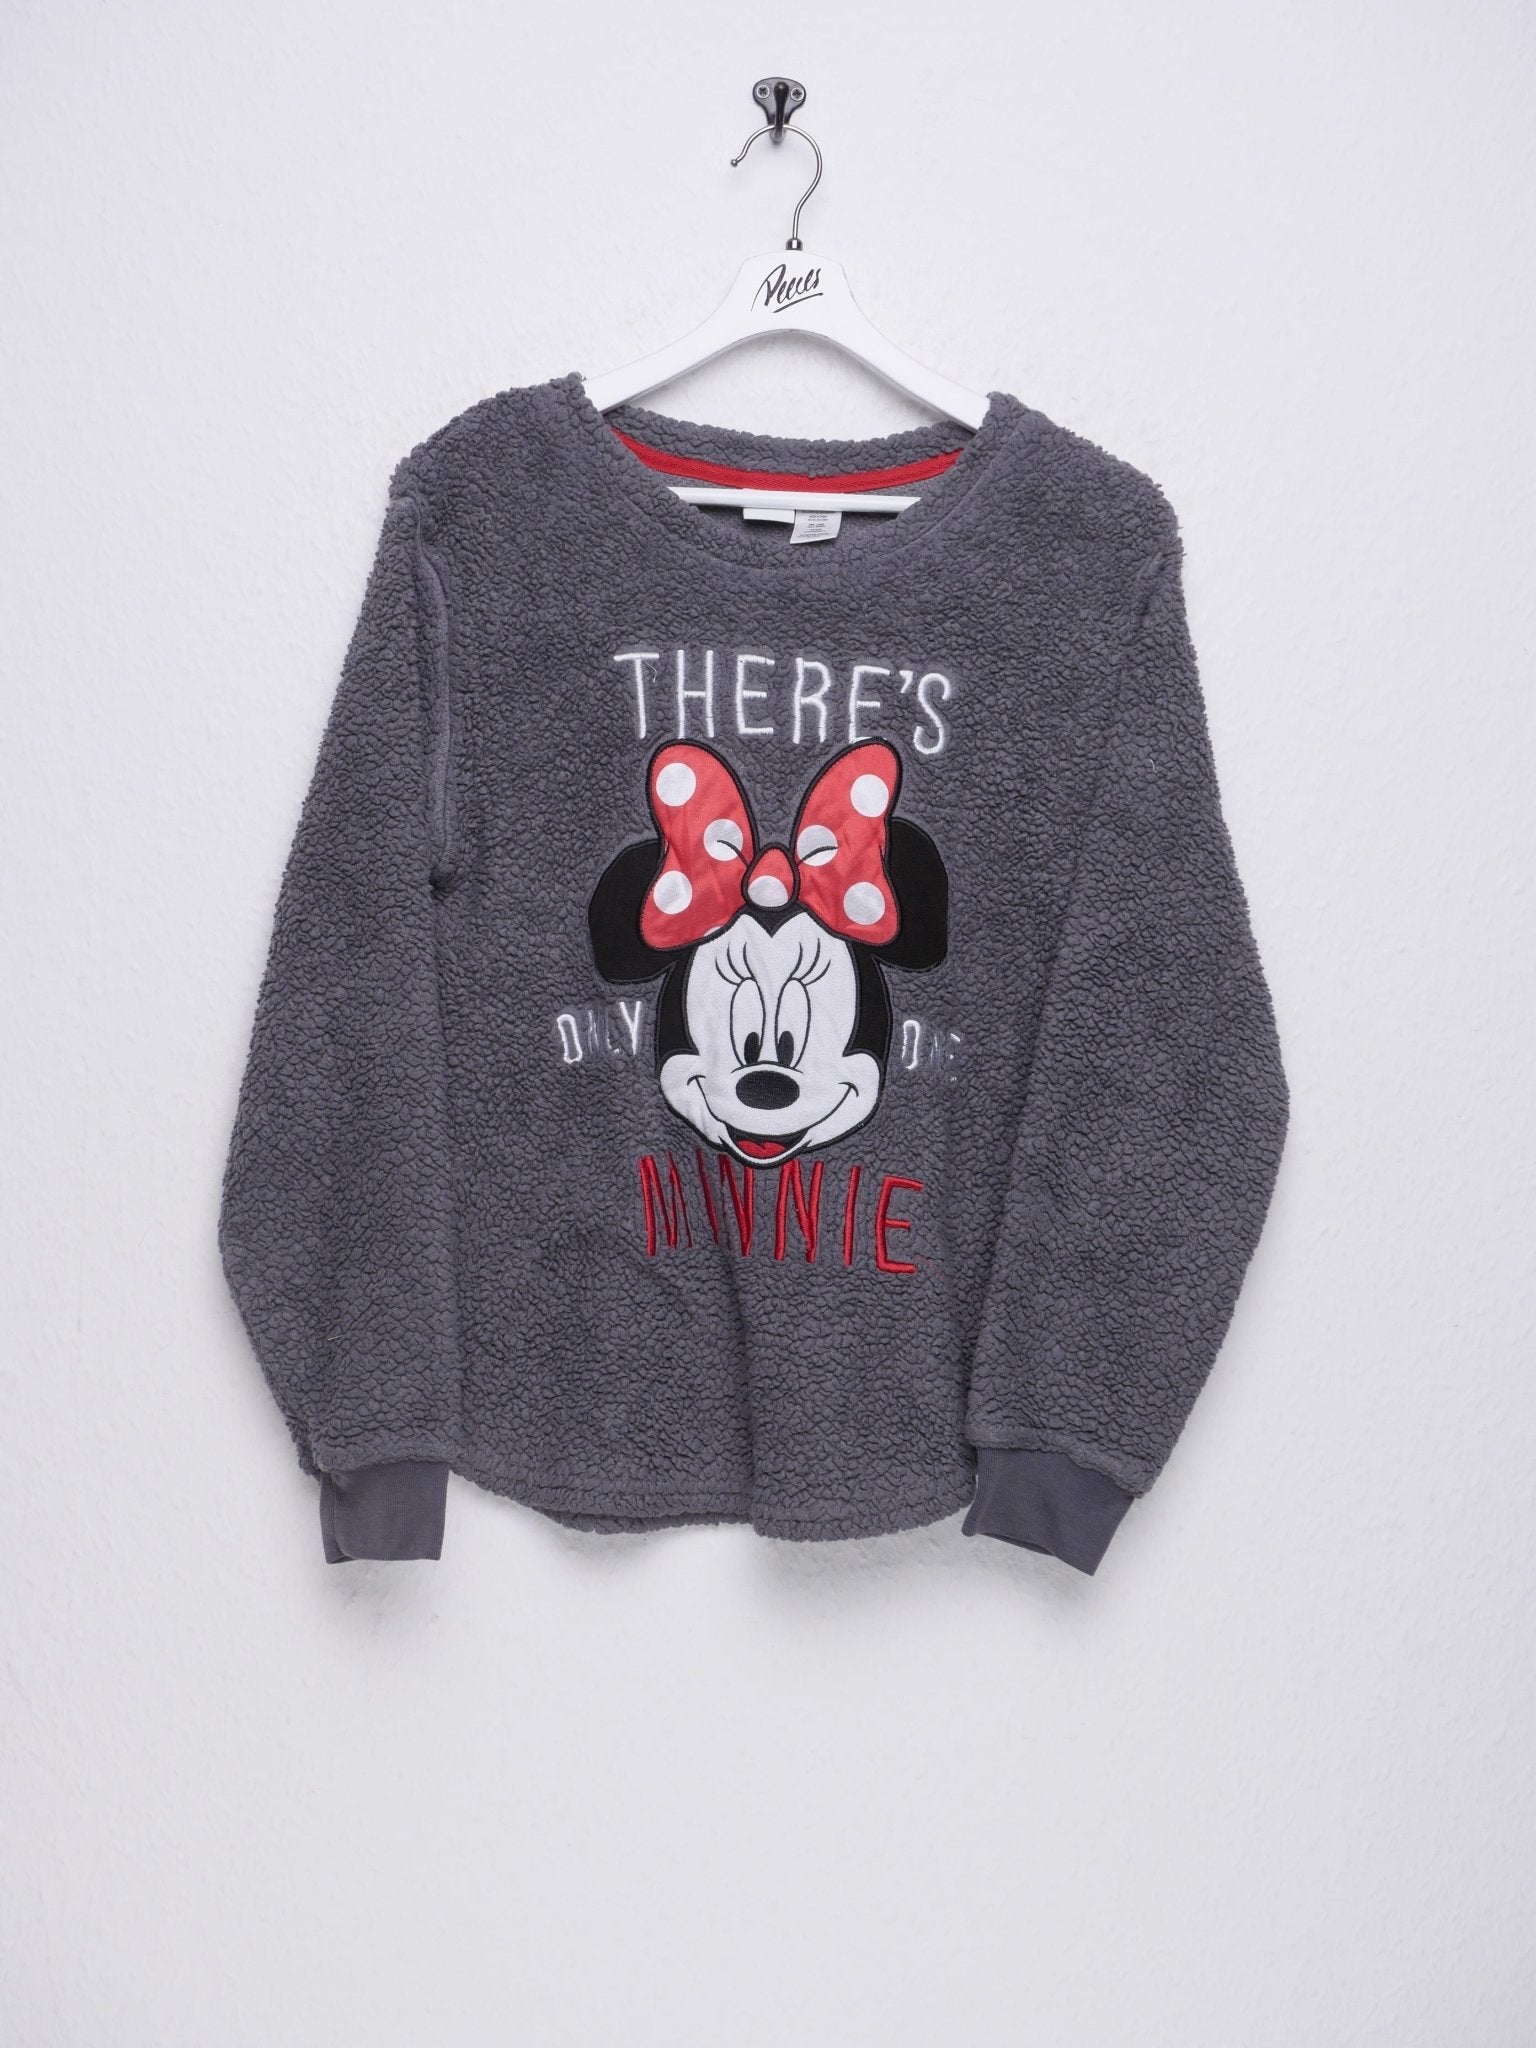 Disney embroidered Minnie Graphic Vintage fluffy Sweater - Peeces